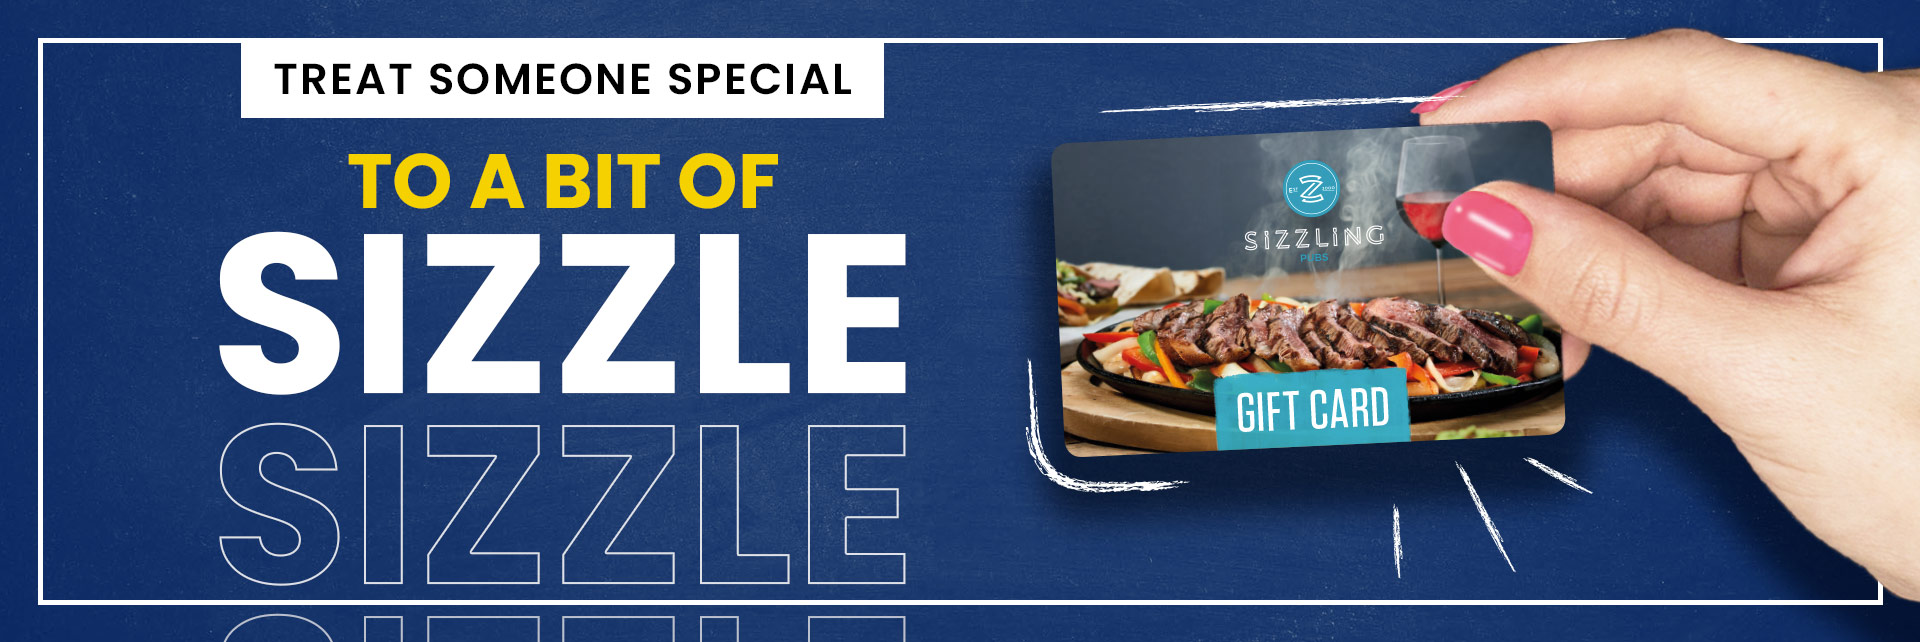 Sizzling Pubs Gift Card at George in Gravesend